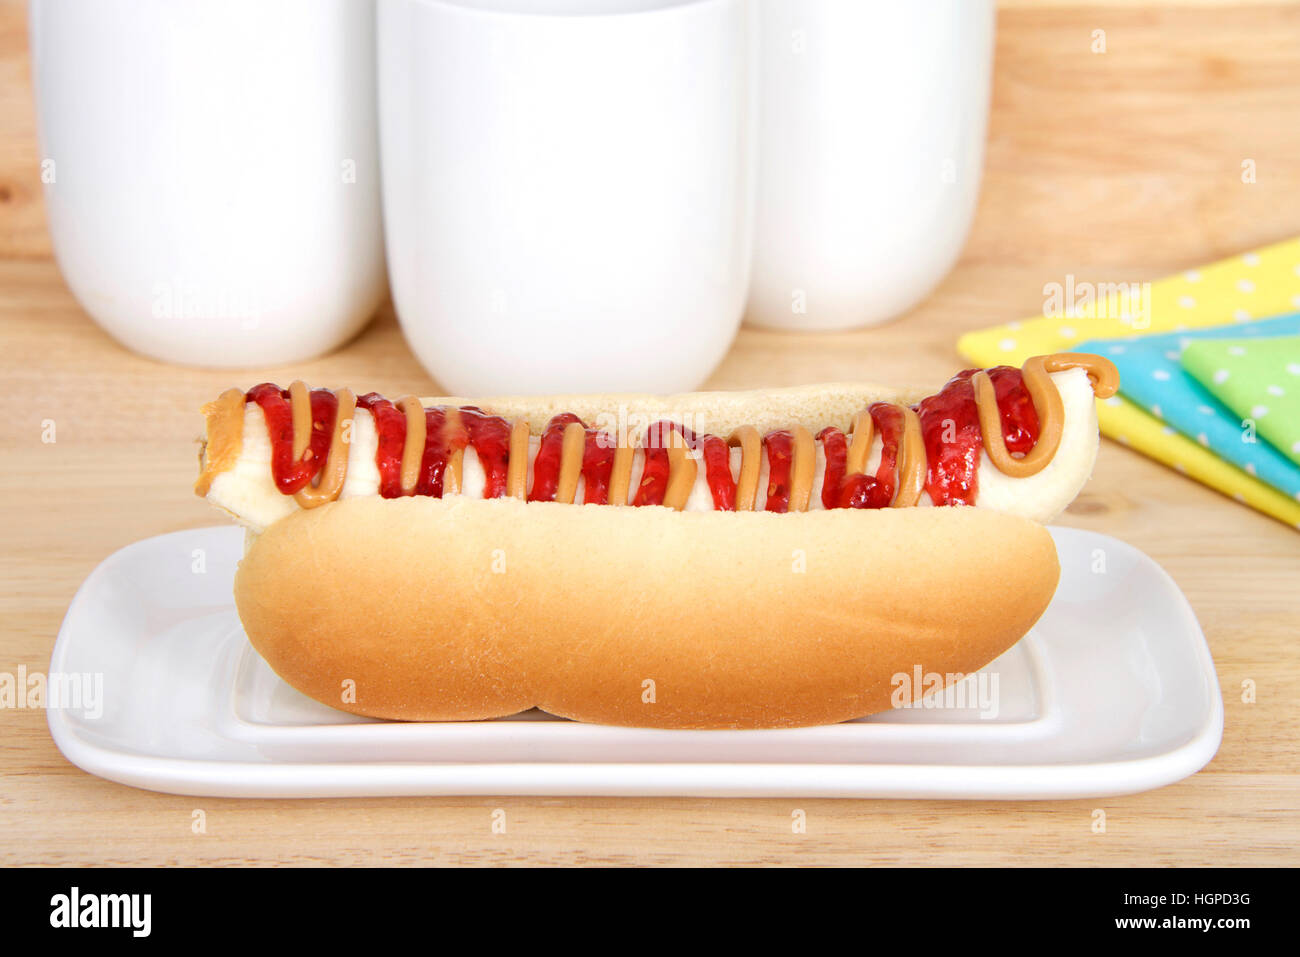 Banana with peanut butter and jelly in a hot dog bun served on a white rectangular plate, yellow, blue, green polka dot napkins and cups in background Stock Photo